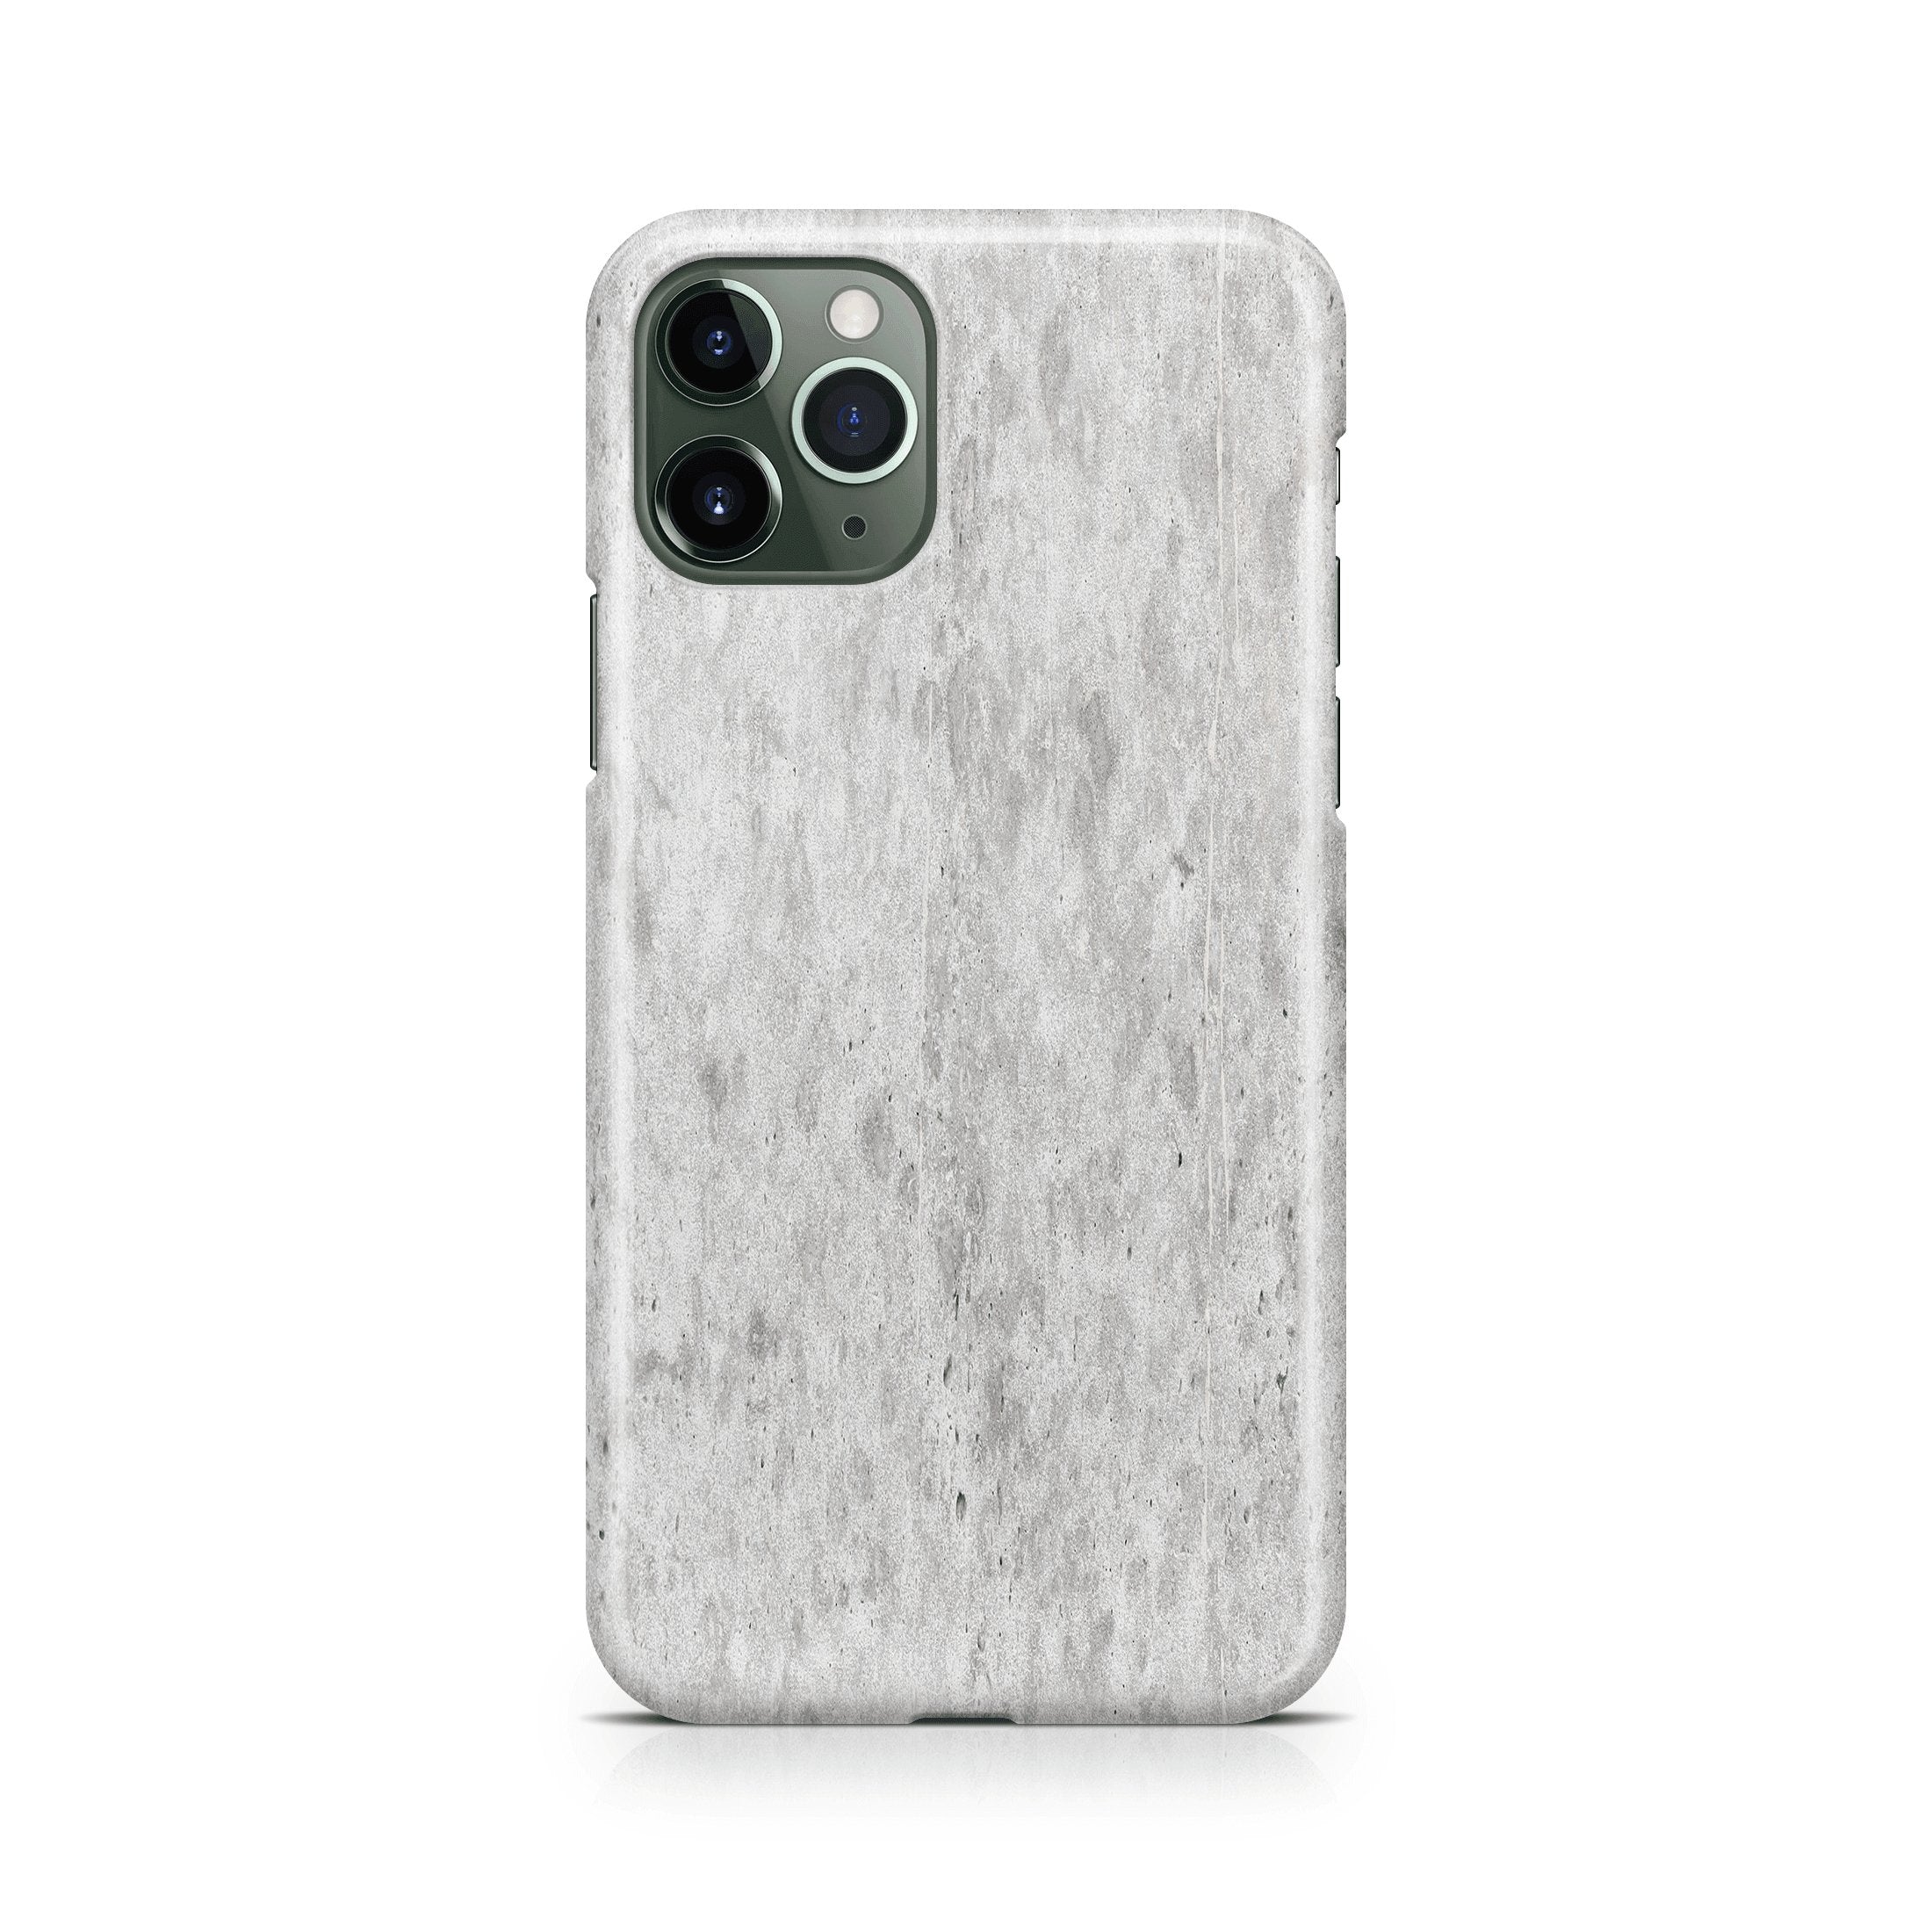 Smooth Concrete - iPhone phone case designs by CaseSwagger